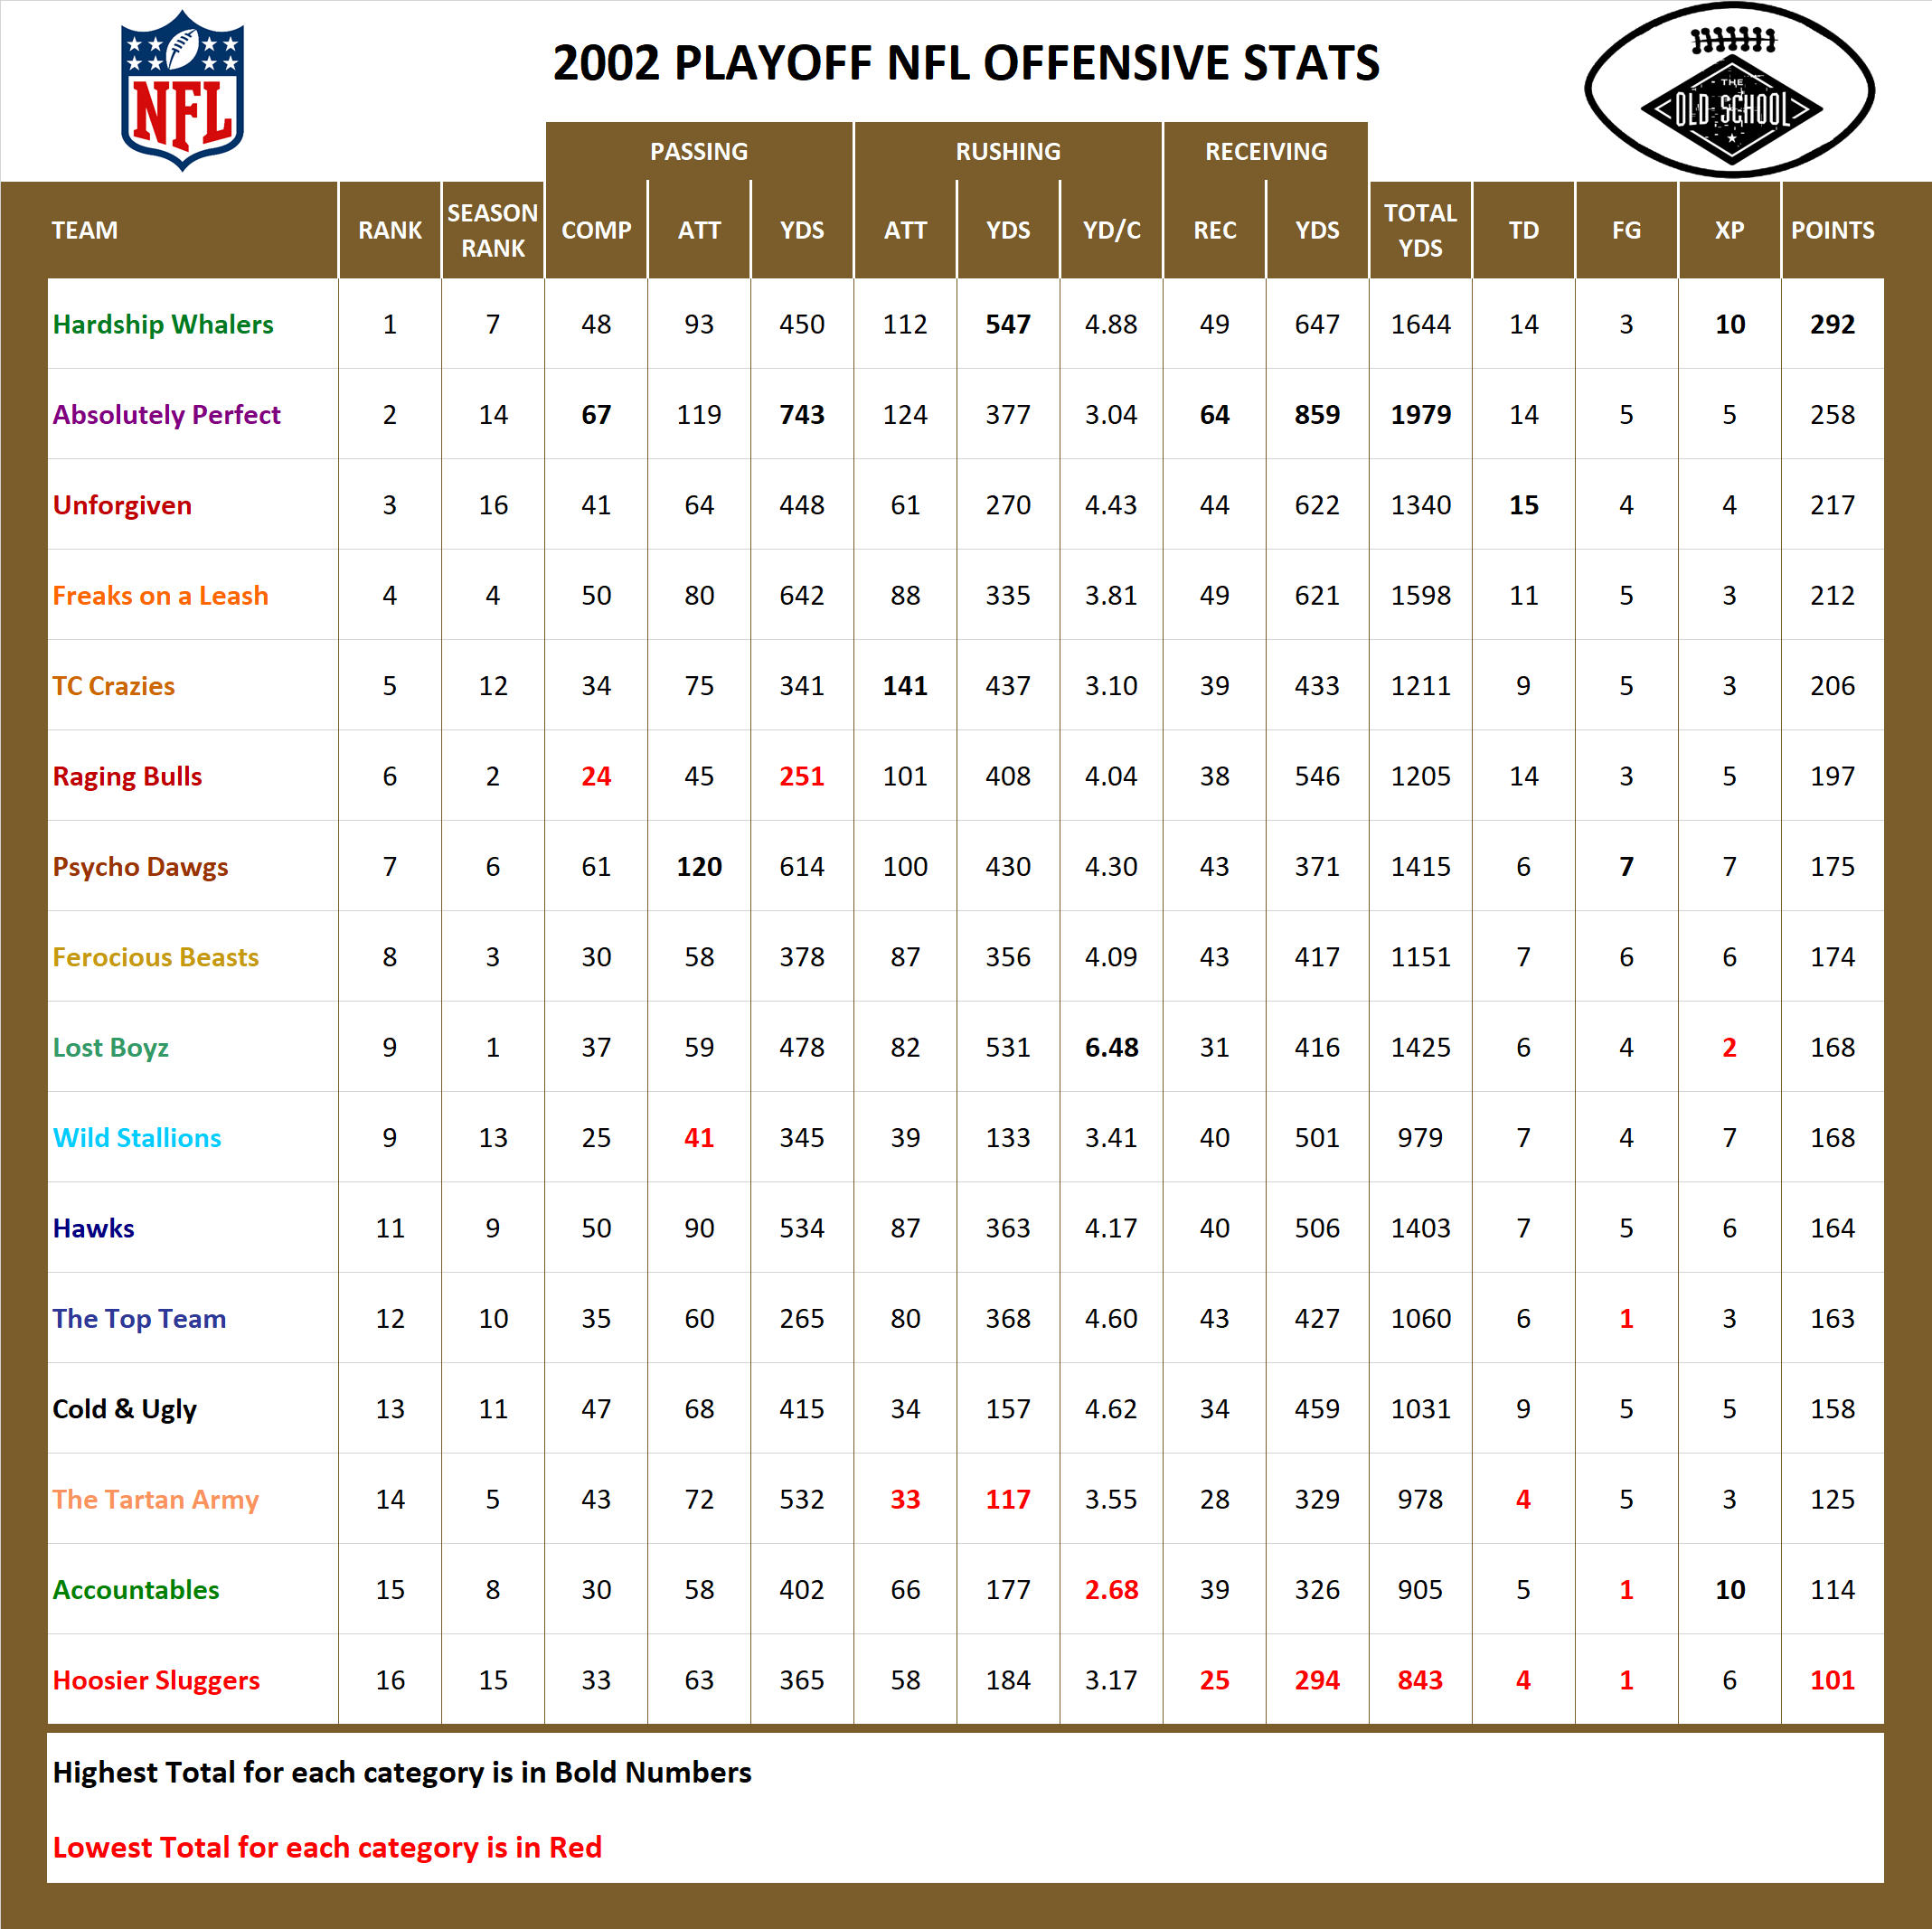 2002 National Football League Pool Playoff Offensive Stats